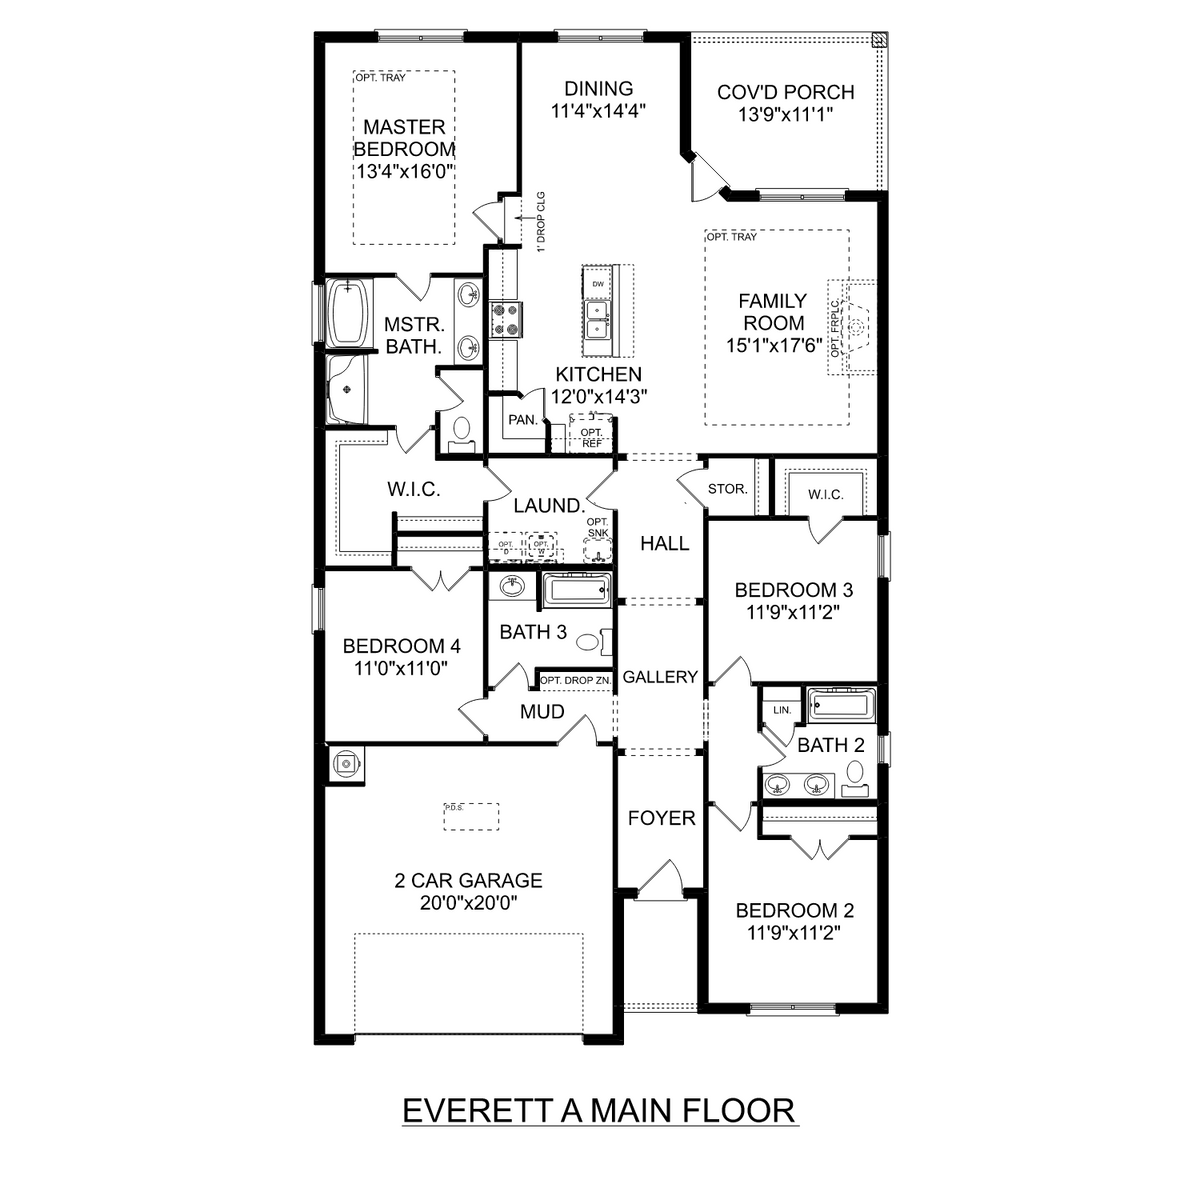 1 - The Everett buildable floor plan layout in Davidson Homes' Spragins Cove community.